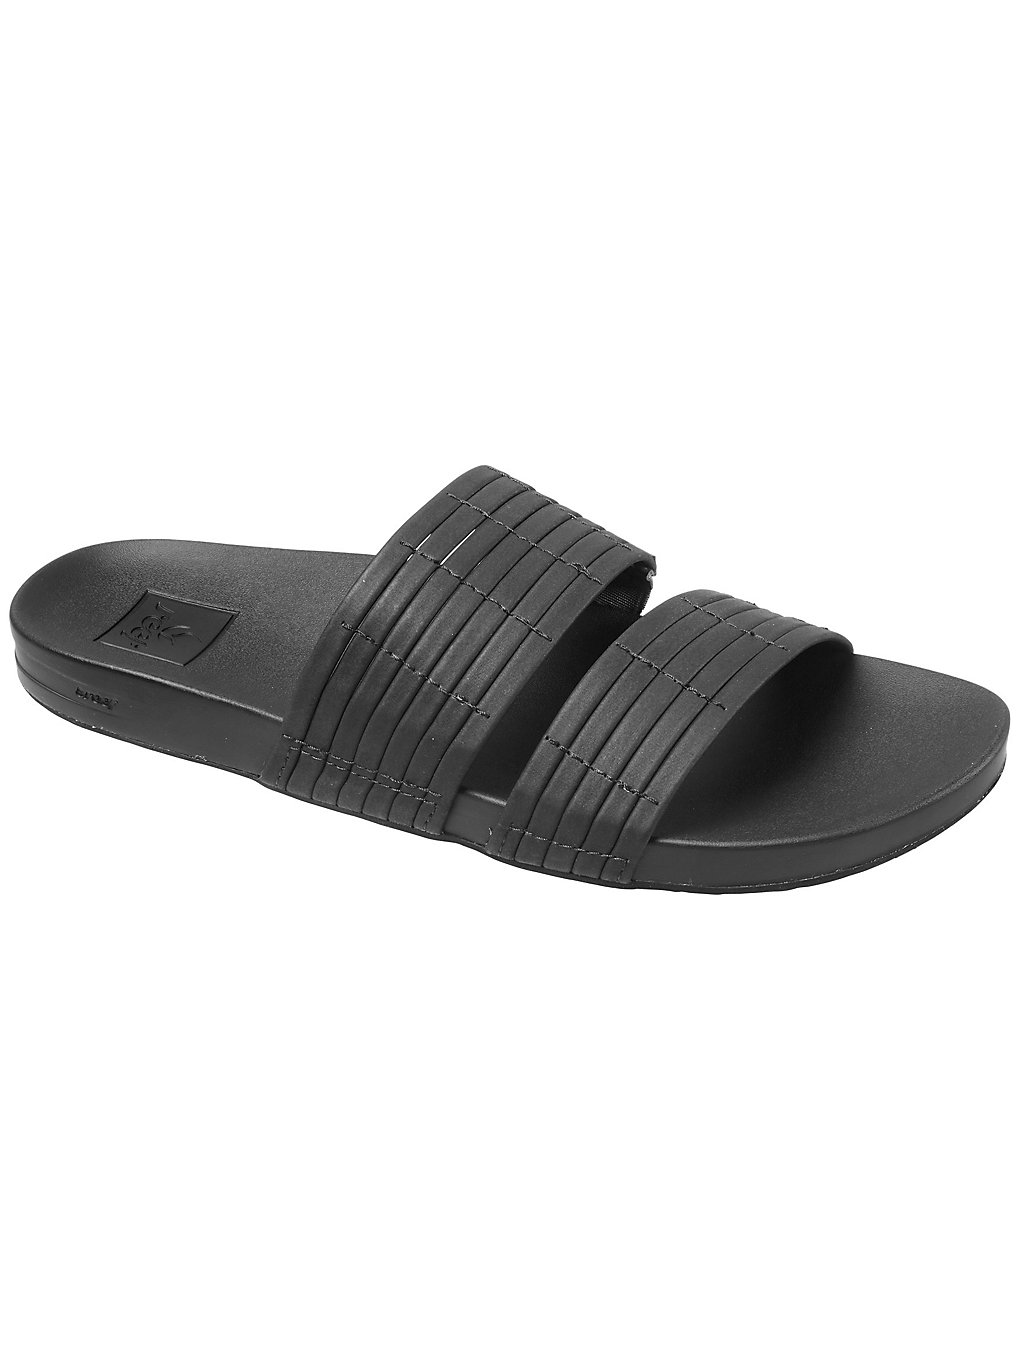 Reef cushion bounce sandals musta, reef